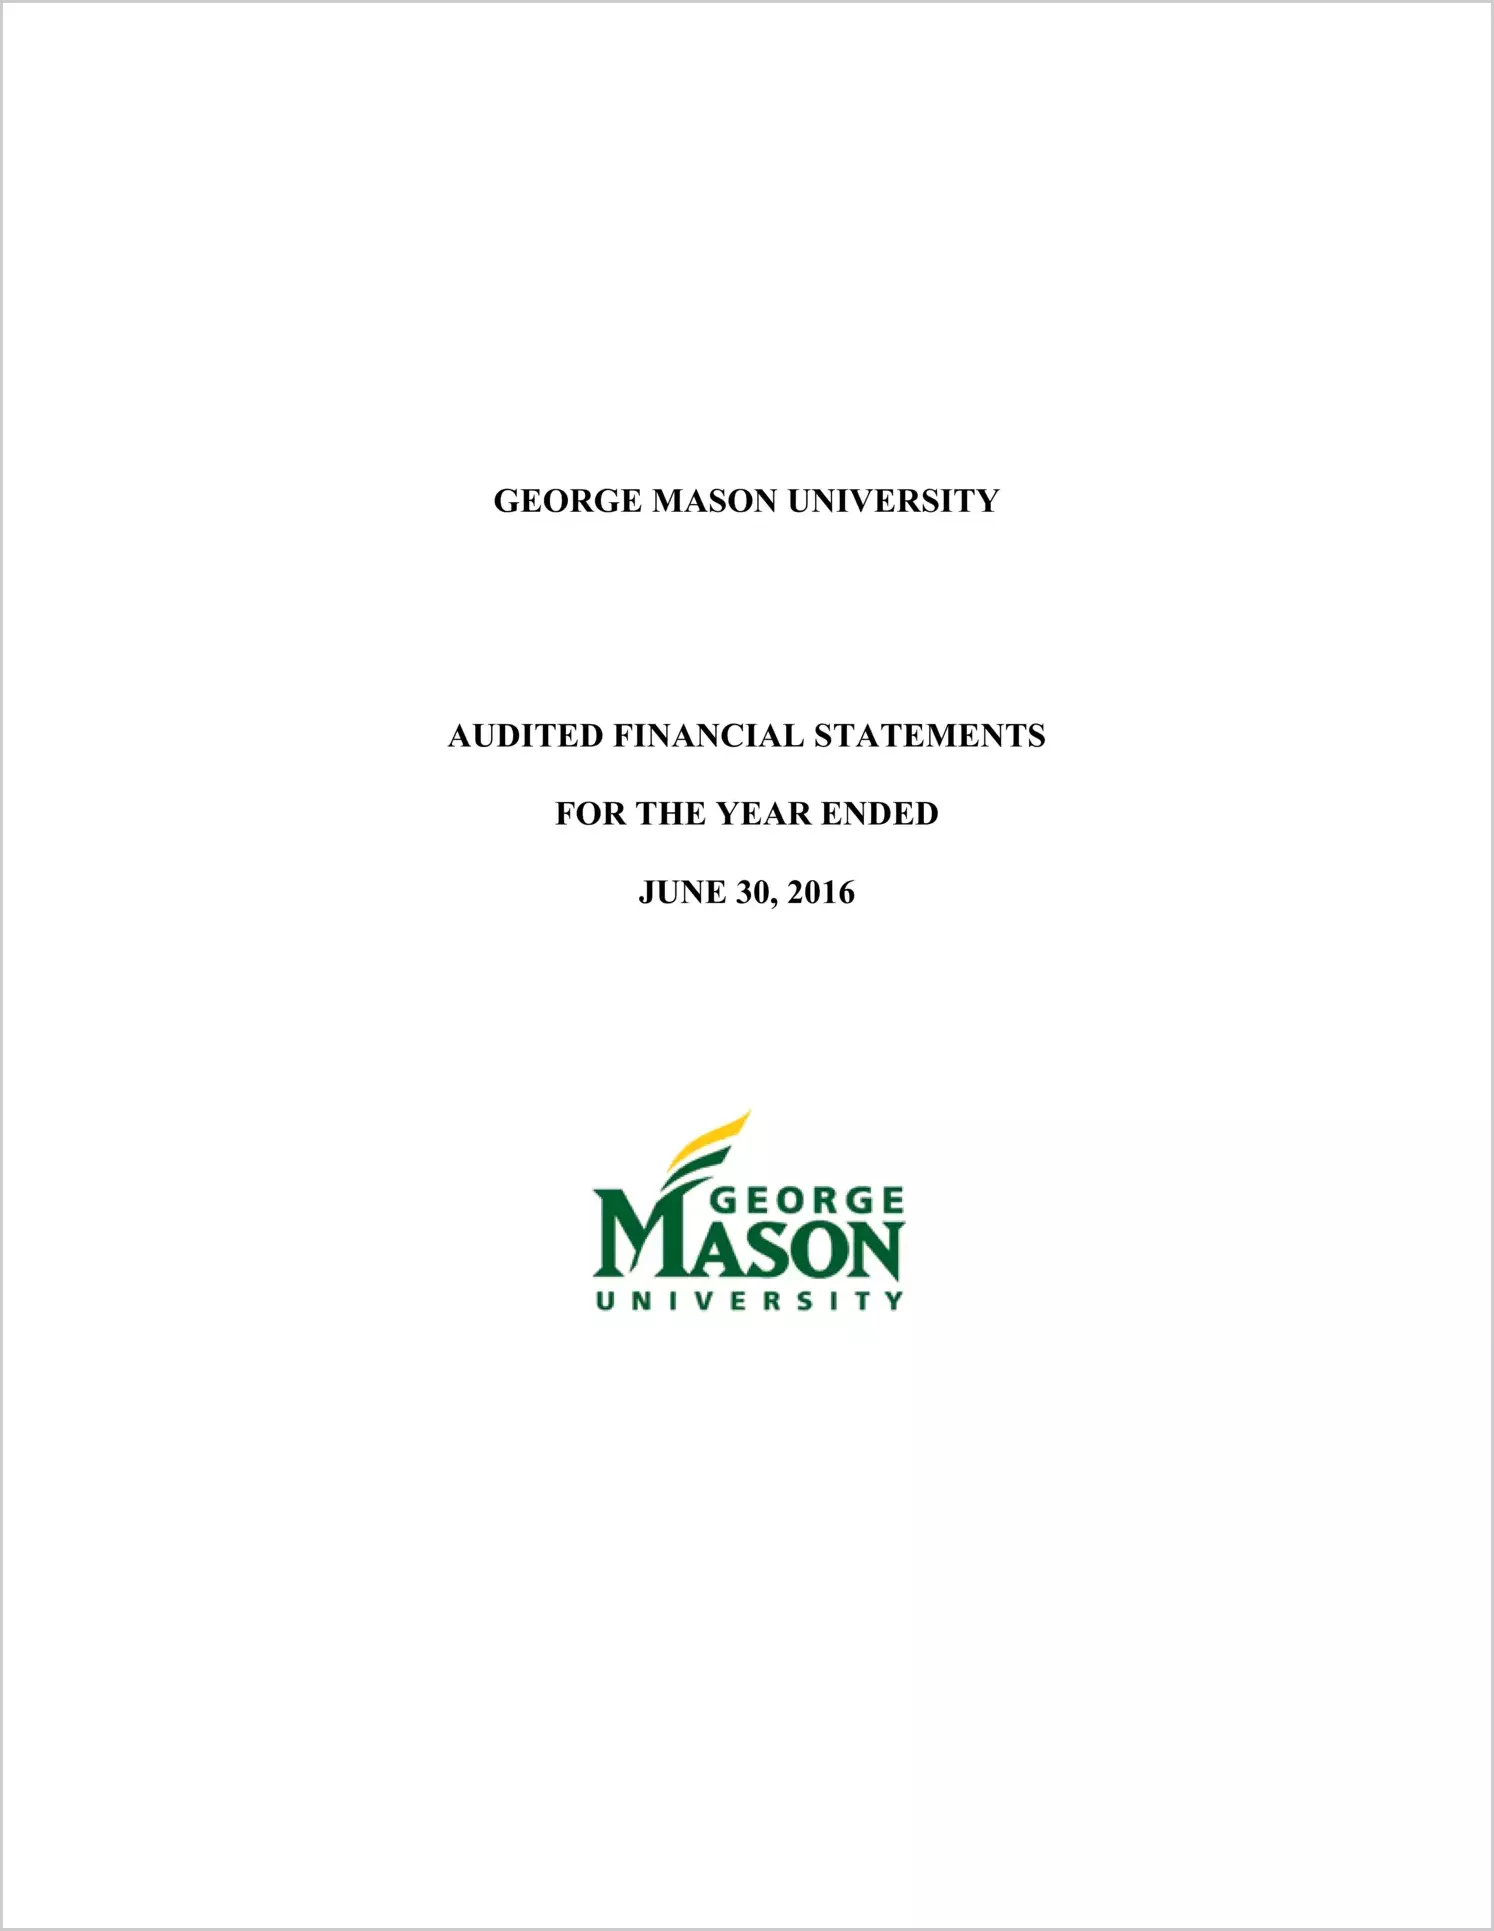 George Mason University Financial Statements for the year ended June 30, 2016